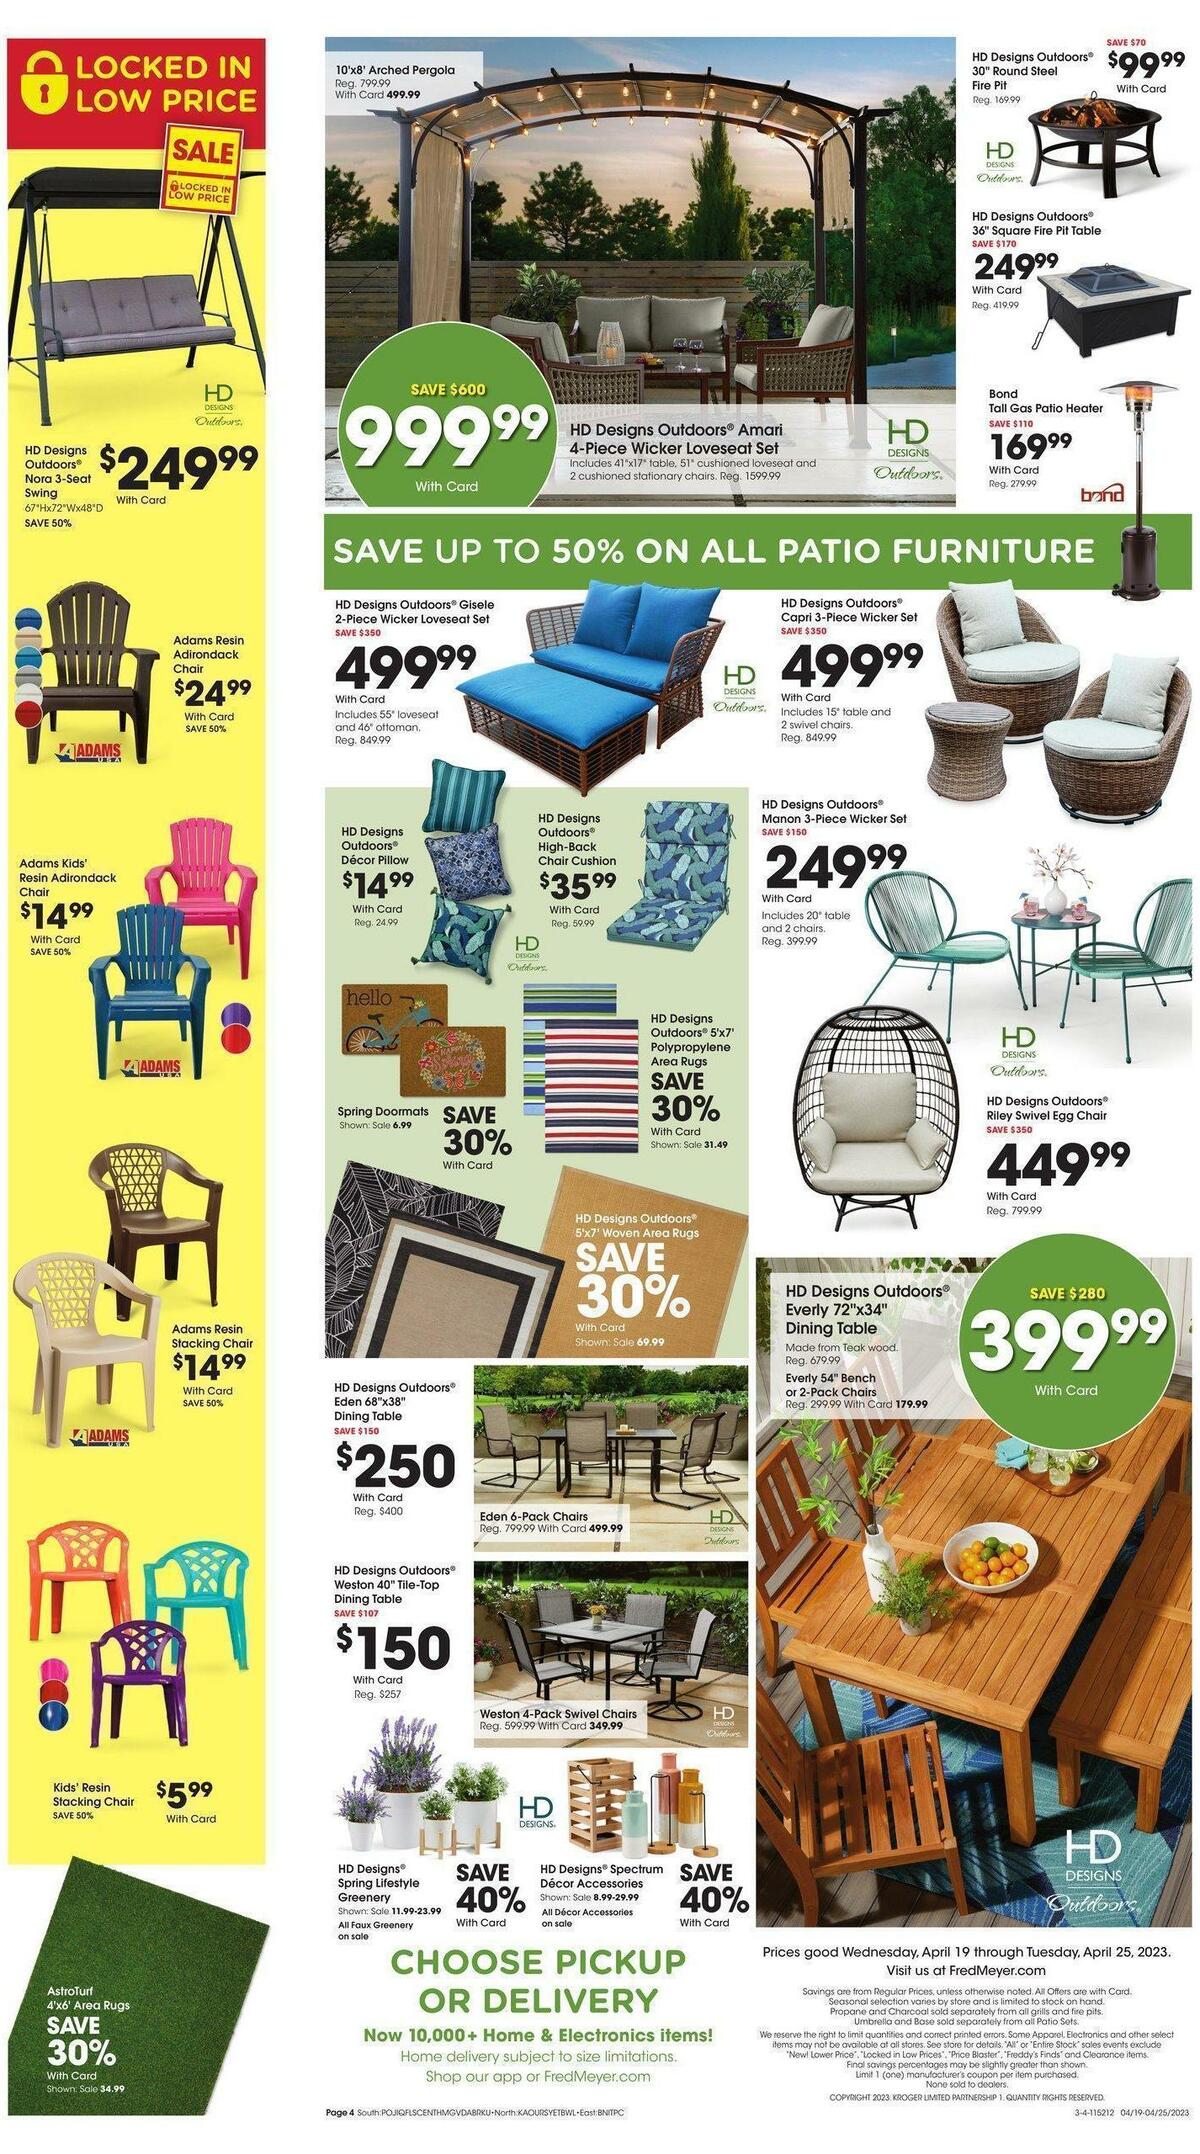 Fred Meyer Garden Weekly Ad from April 19